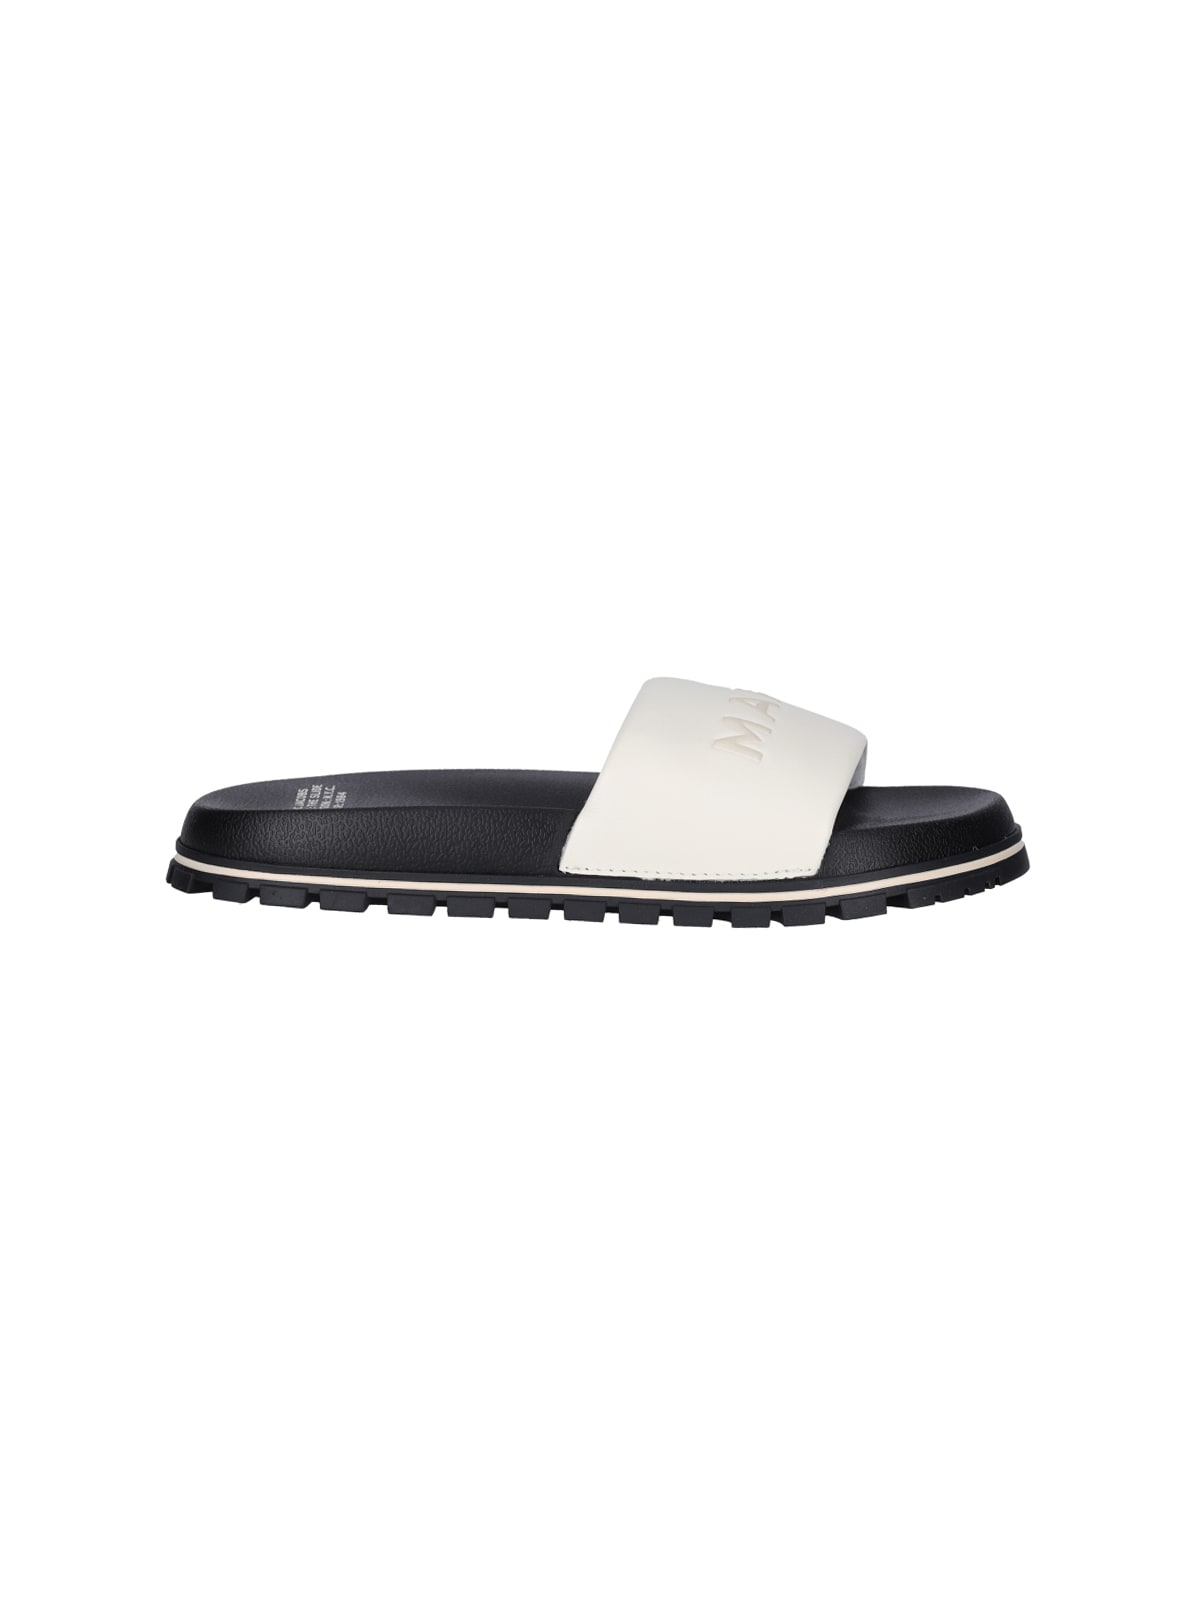 the Leather Slide Sandals